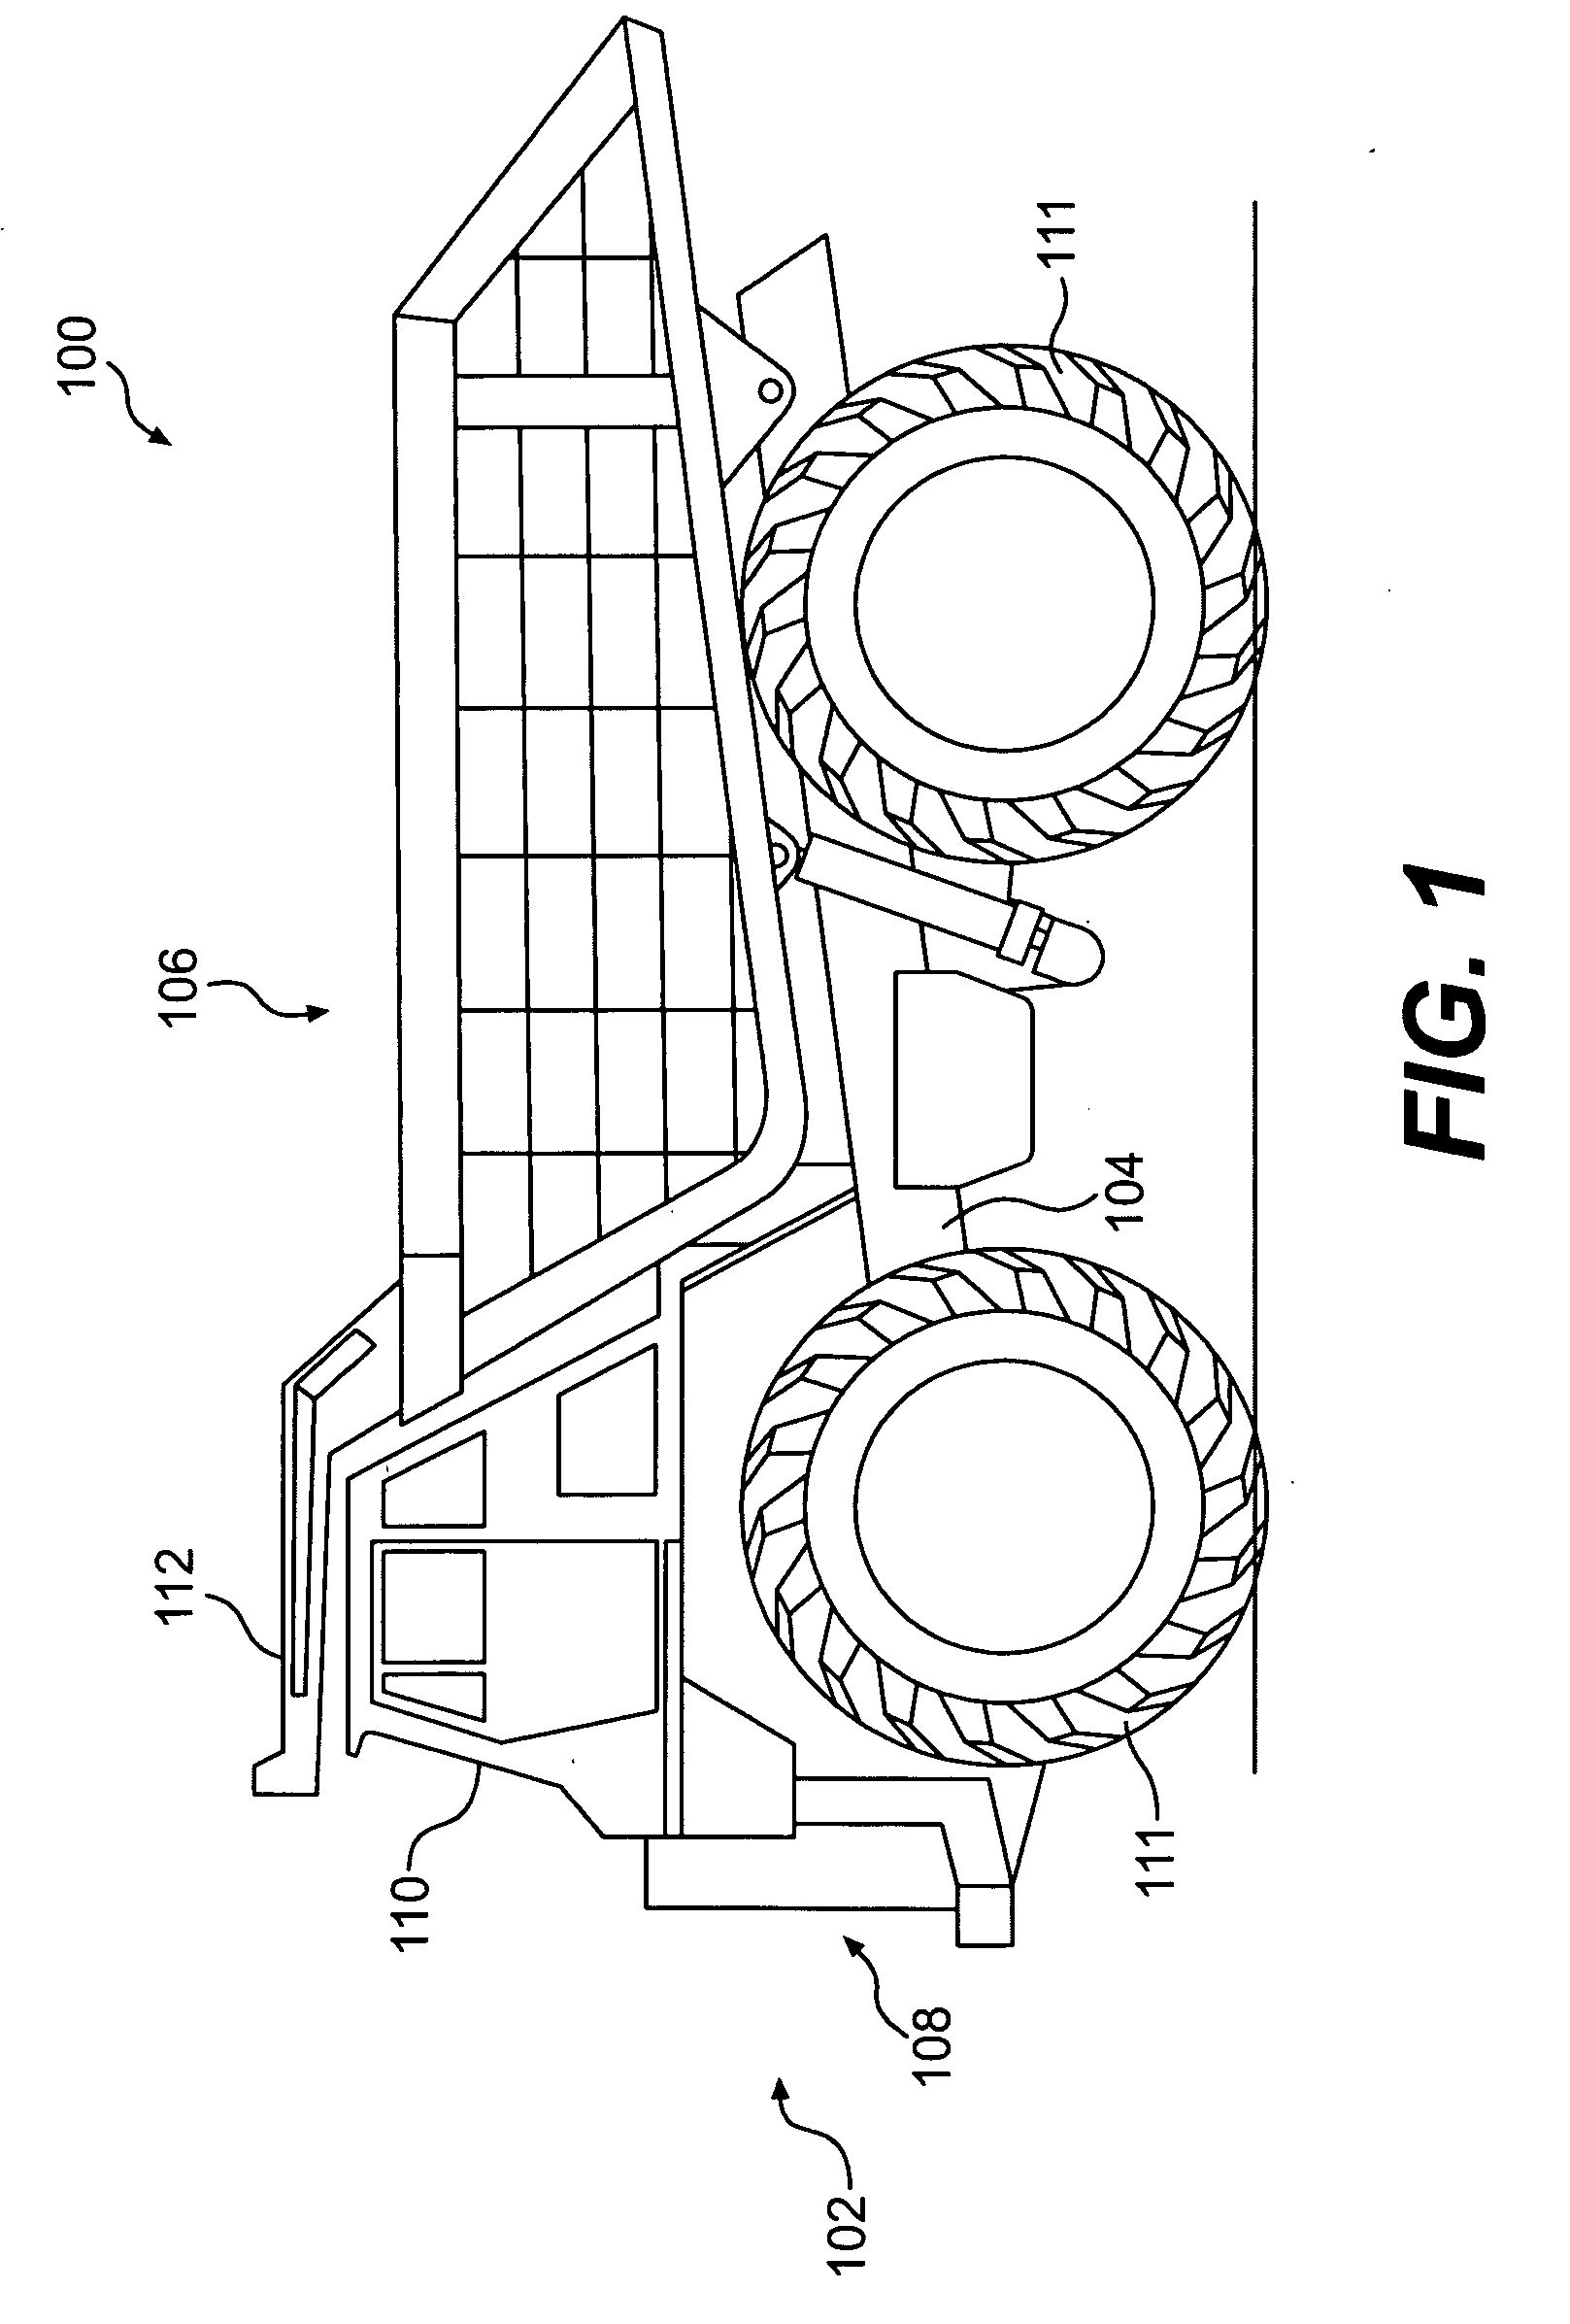 Control system for a load-carrying vehicle